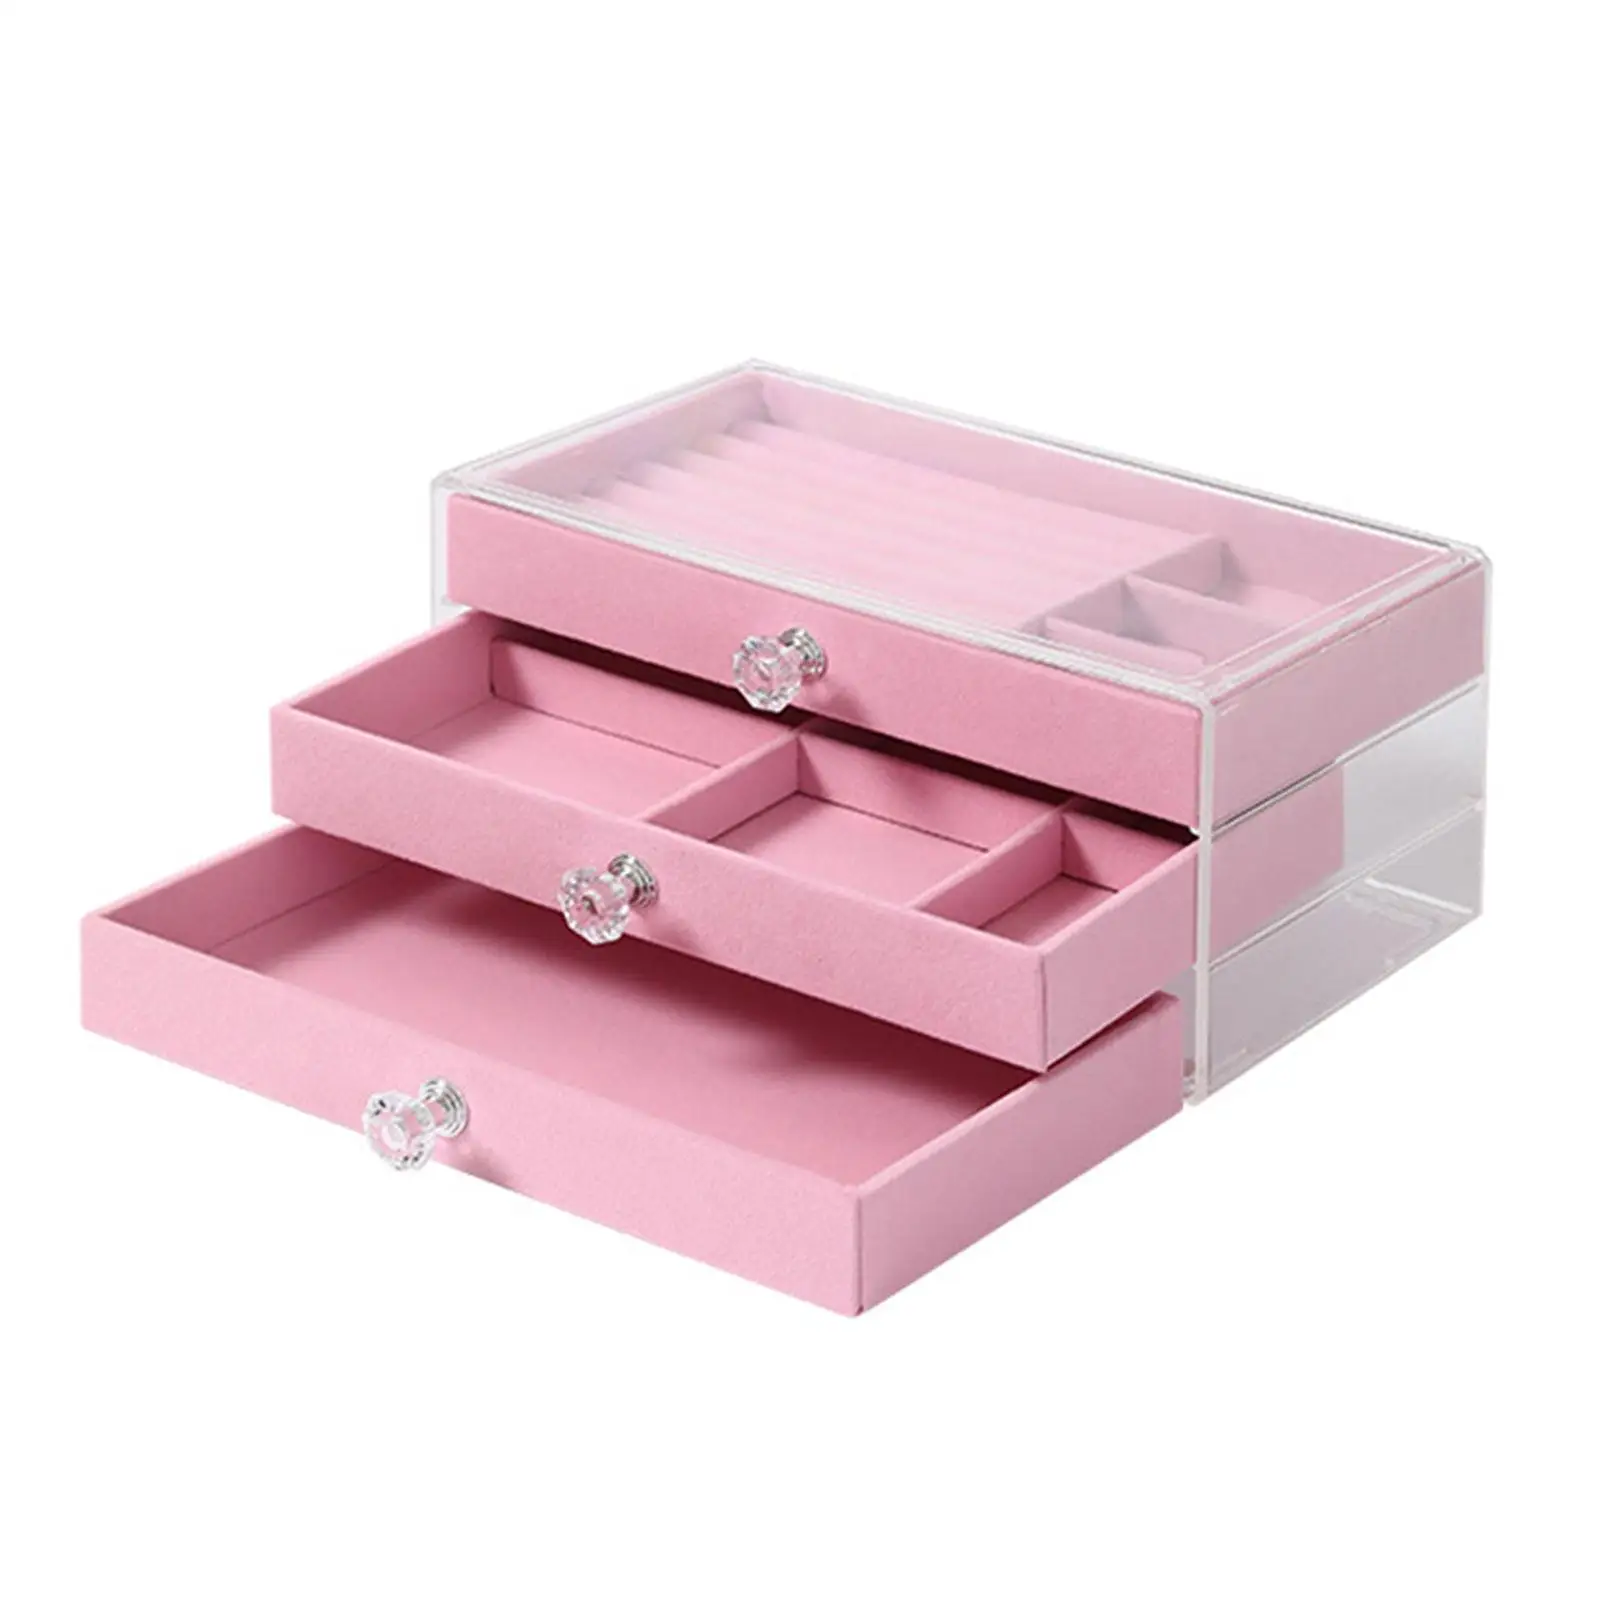 Portable Jewelry Box with Mirror Rings Acrylic Drawer Type Jewelry Display Holder 3 Layer Bracelets Jewelry Case Home Travel